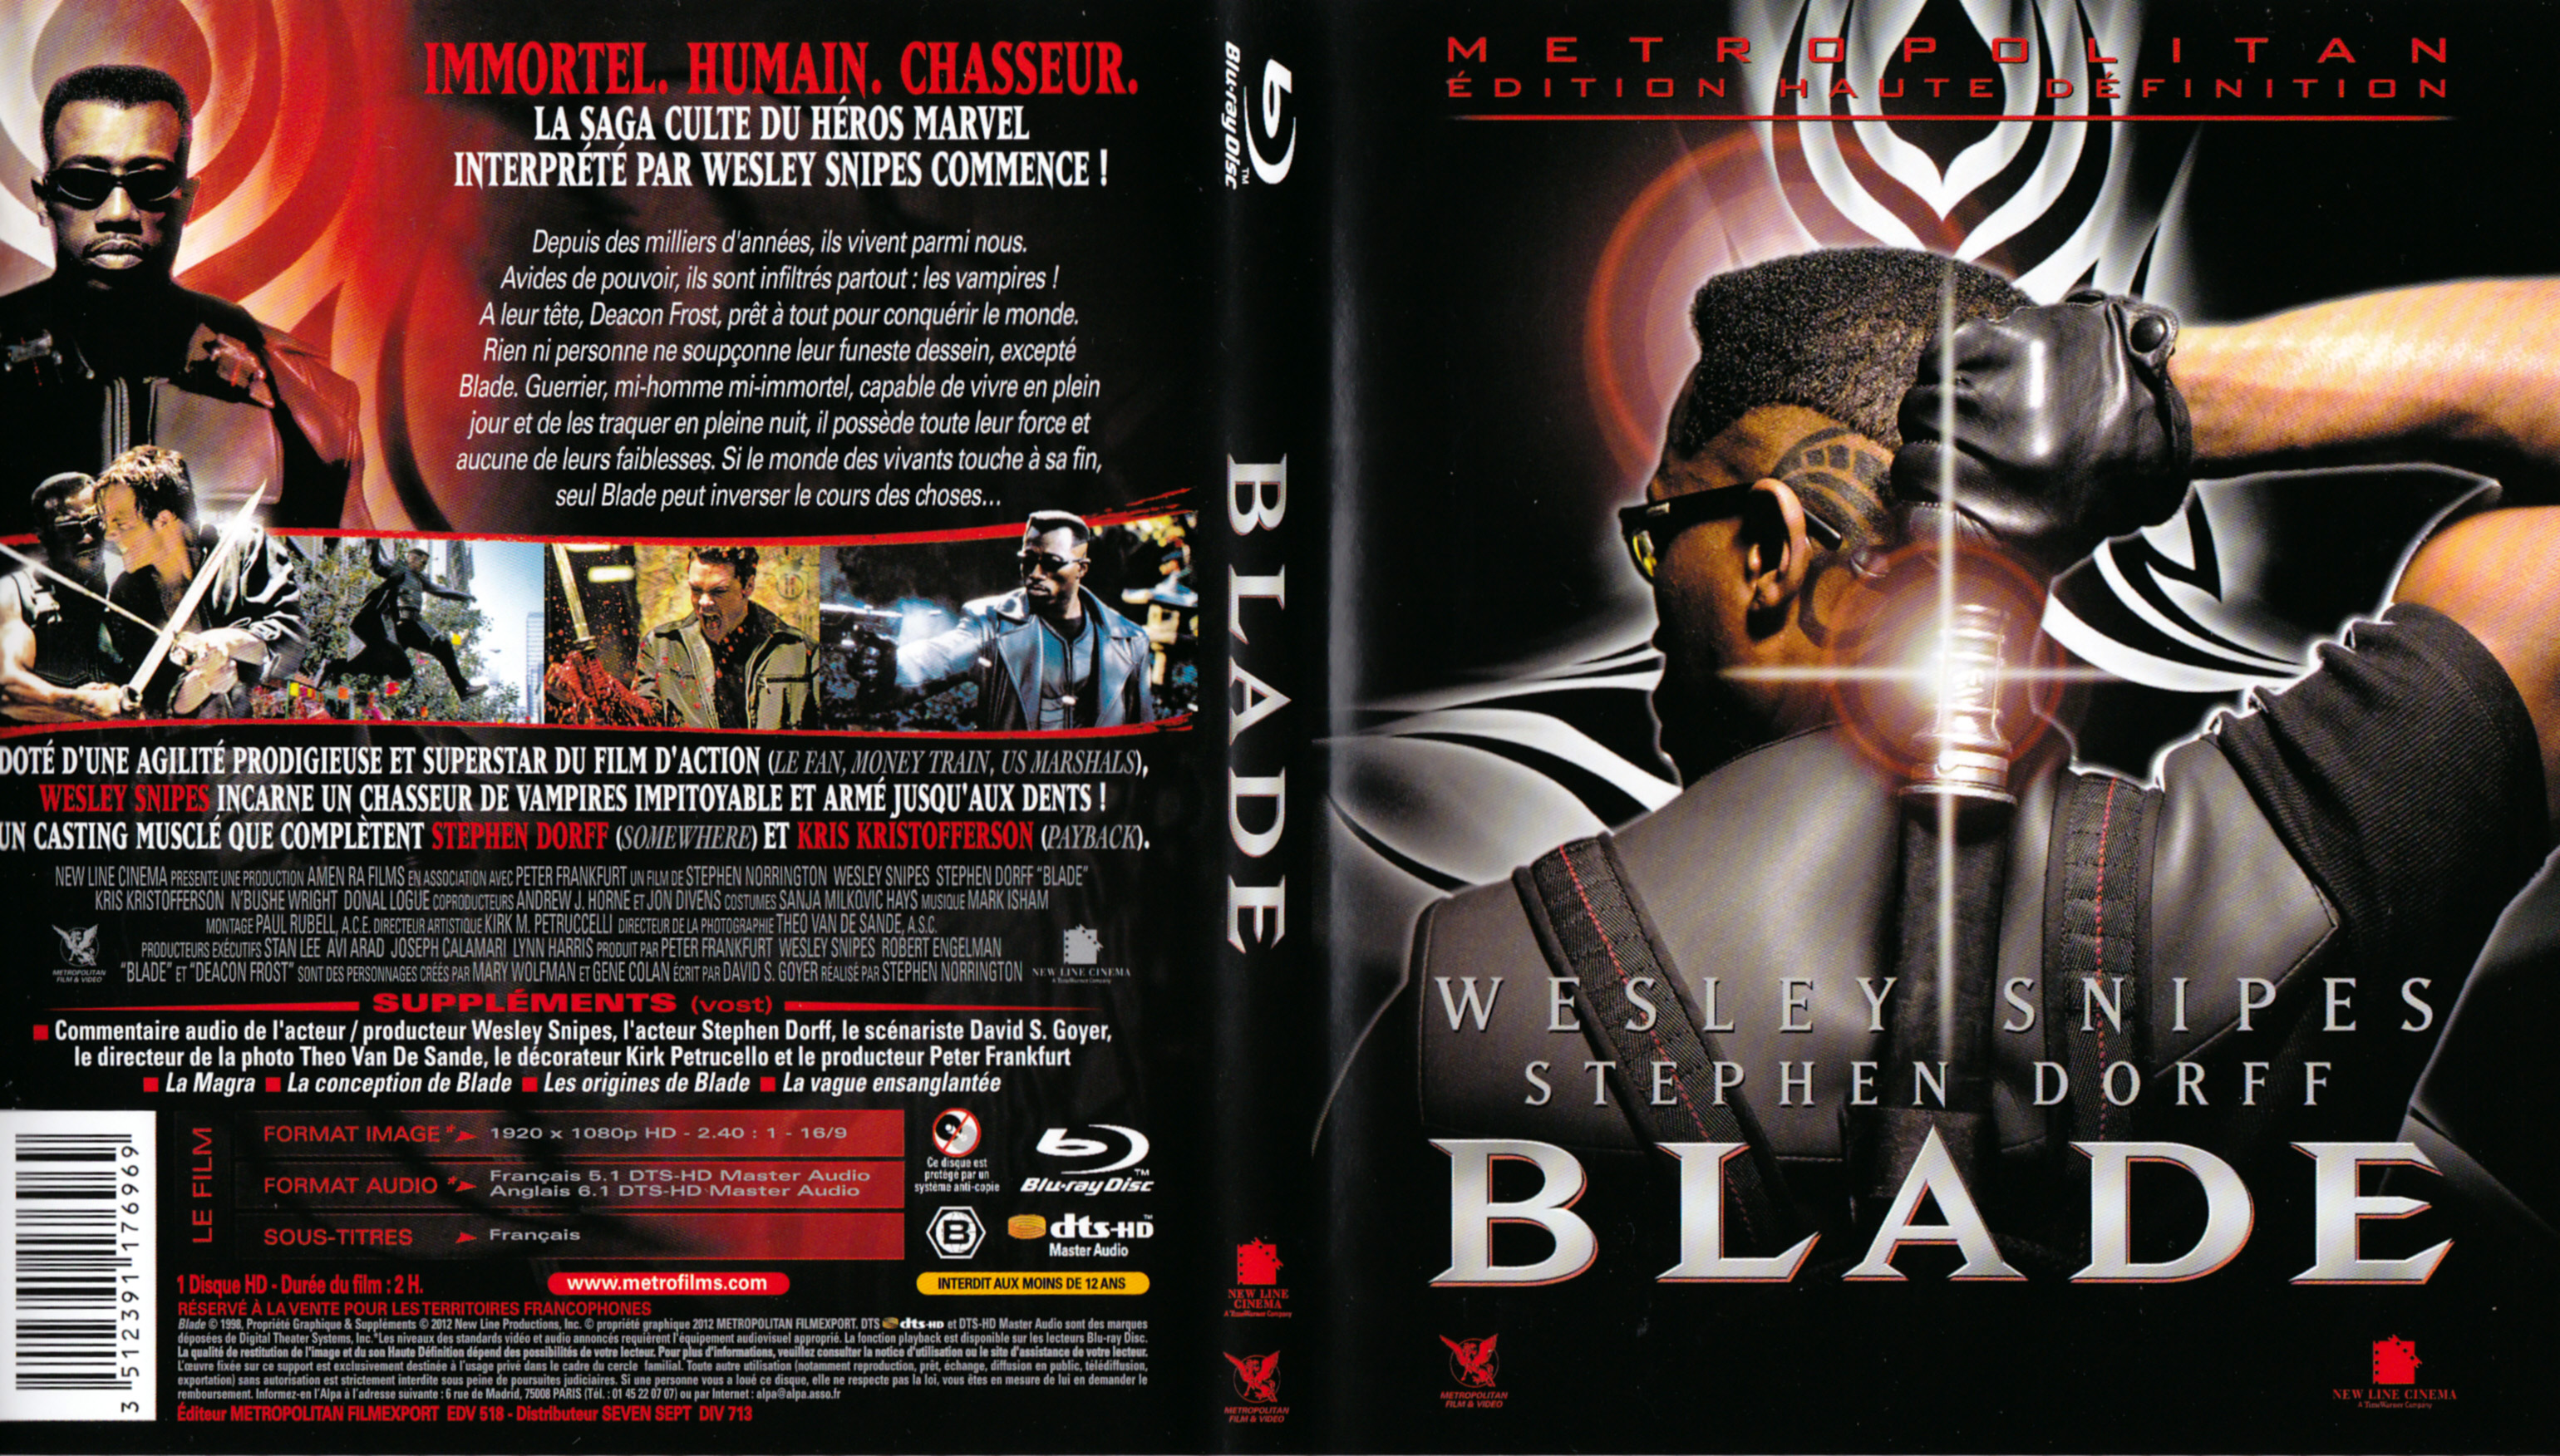 Jaquette DVD Blade (BLU-RAY)